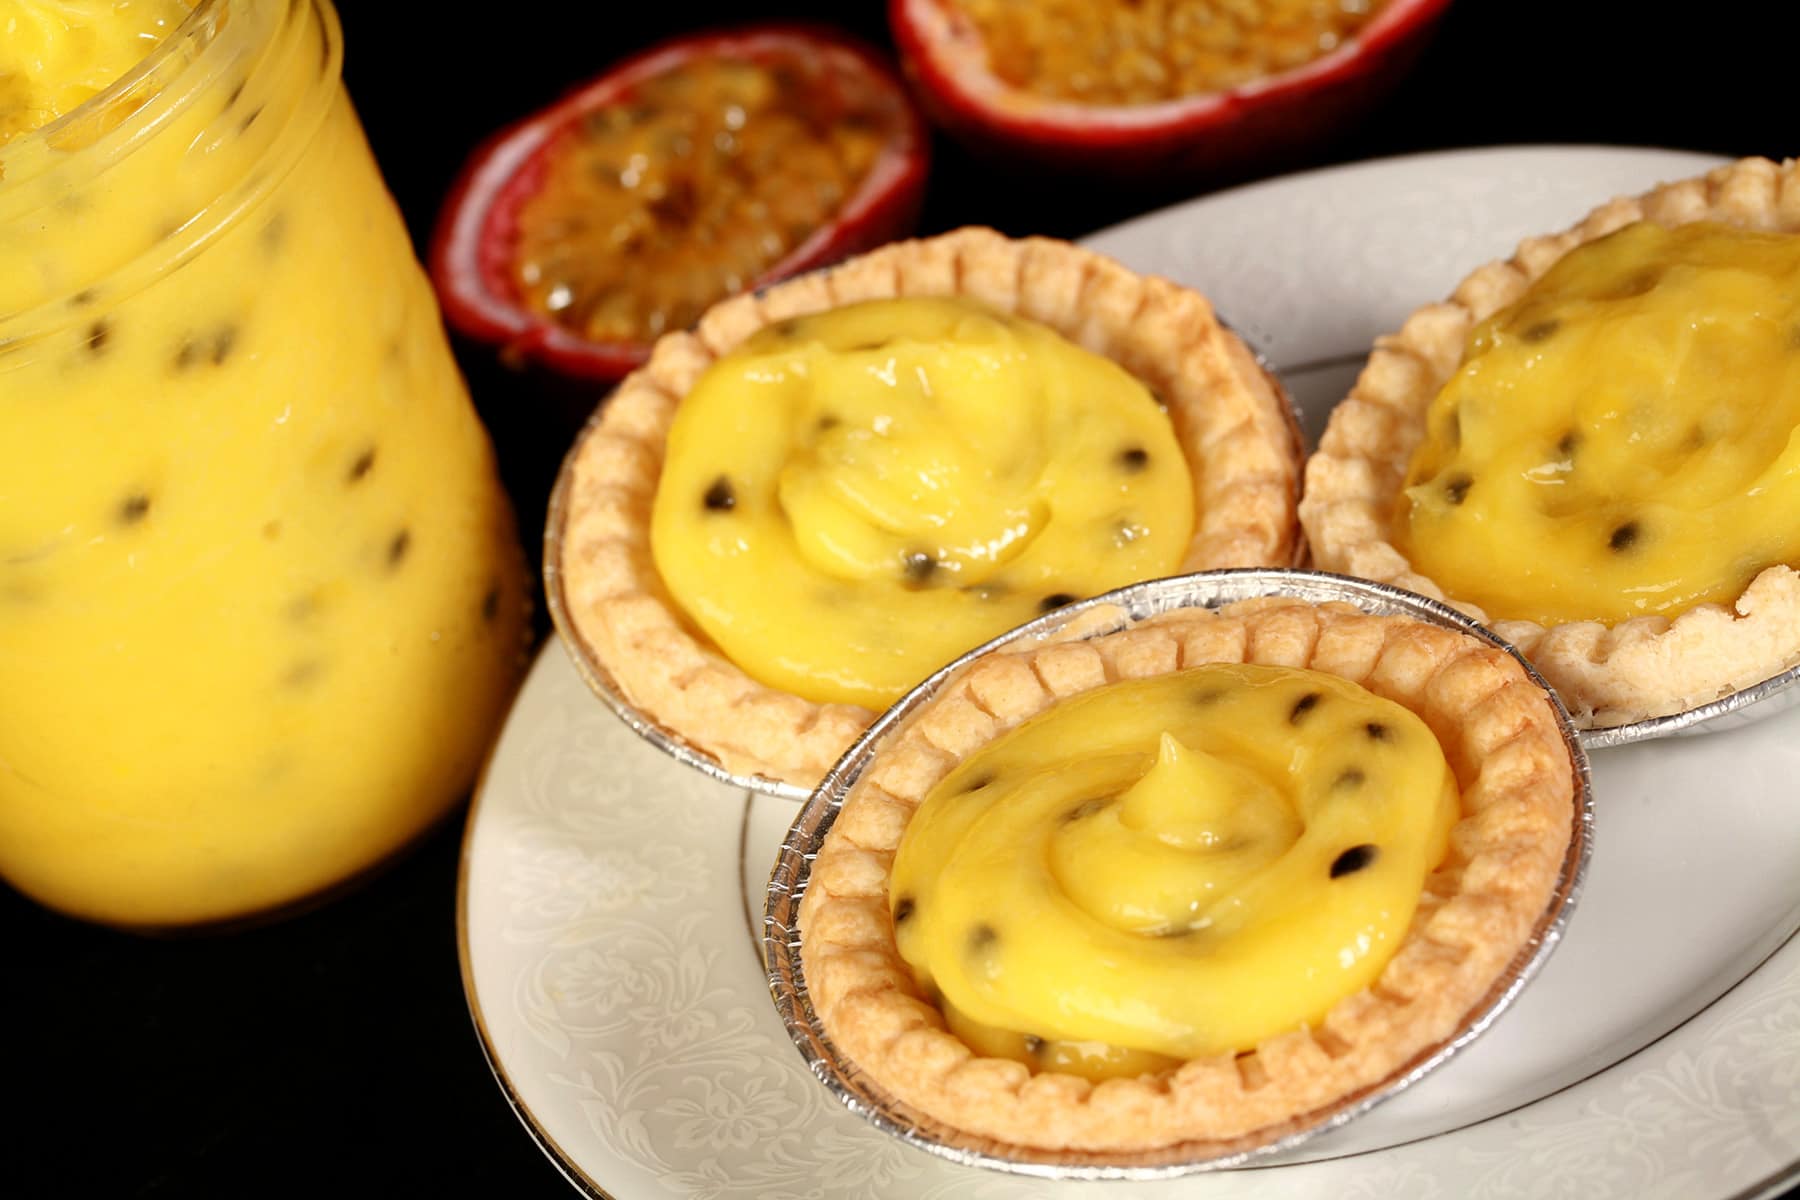 3 passionfruit tarts on a plate. There is a jar of passionfruit curd next to the plate, along with a halved passionfruit.